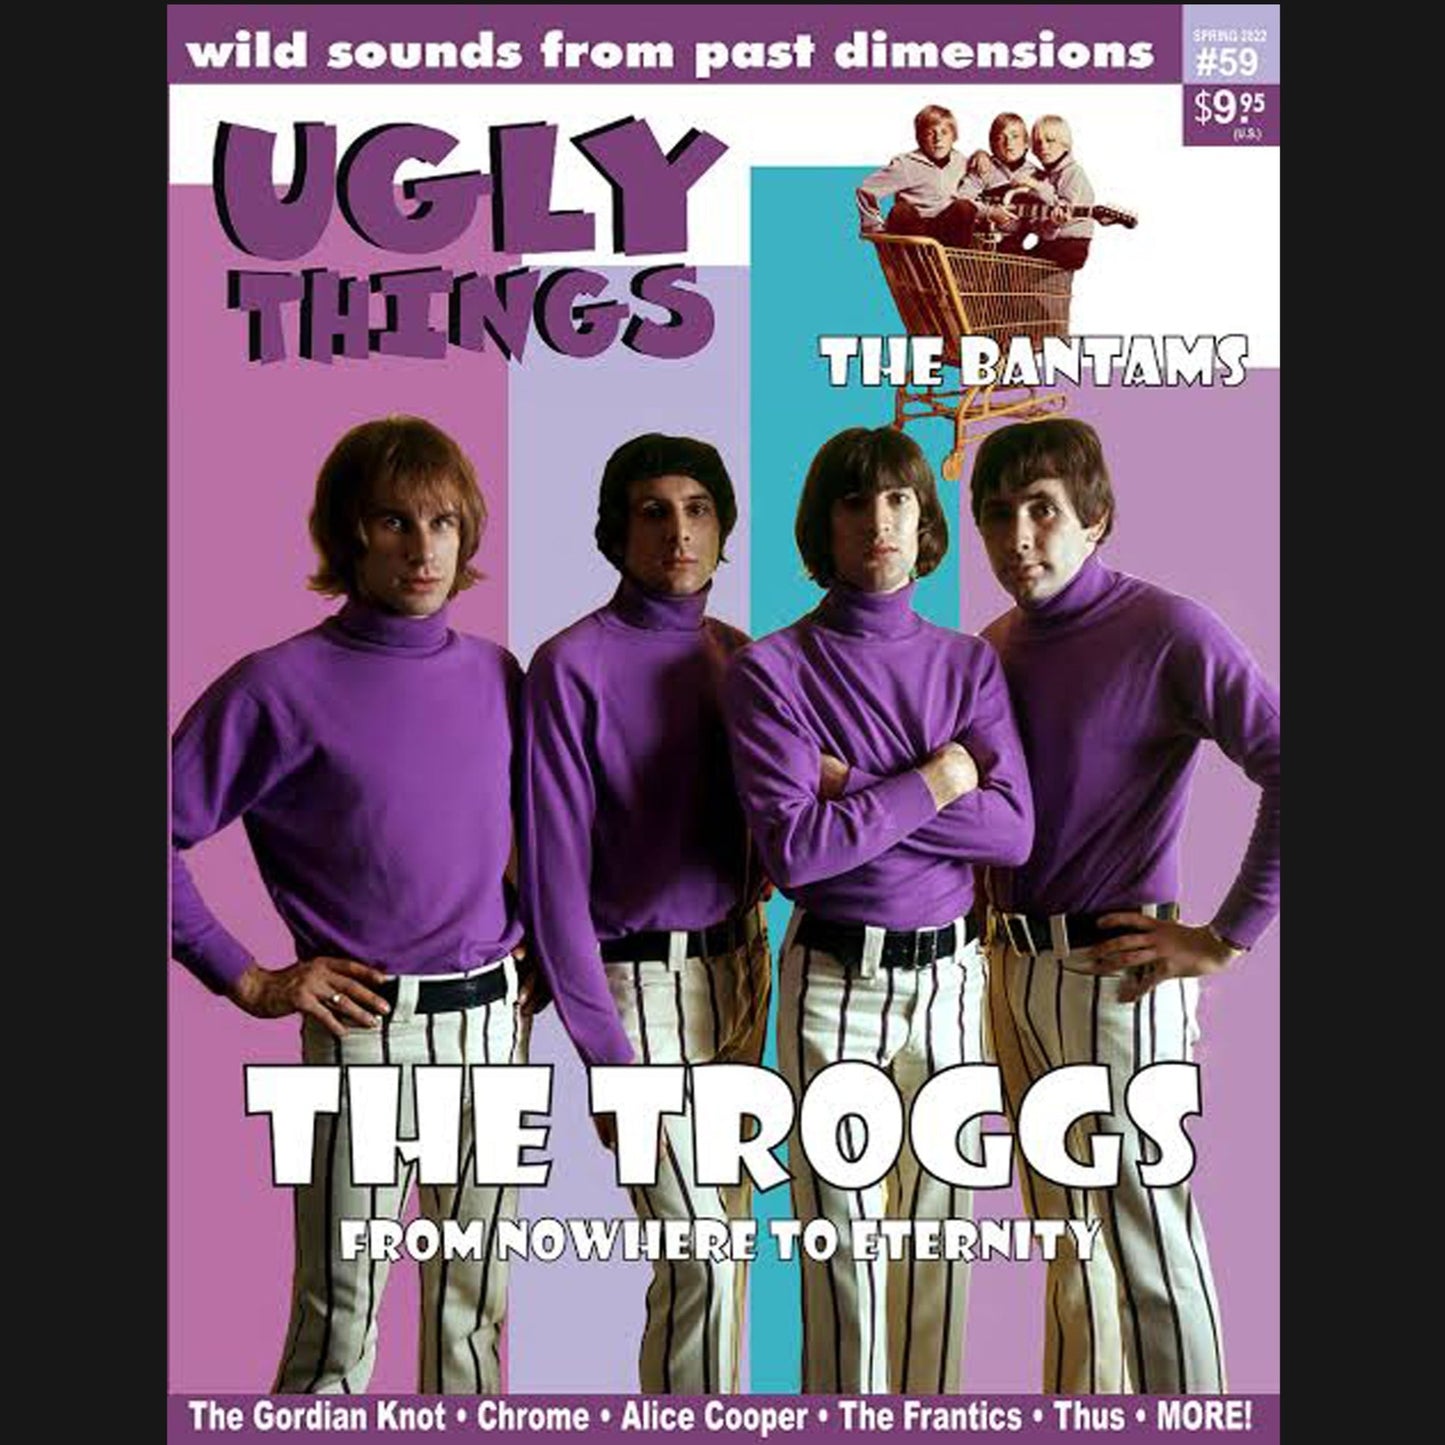 UGLY THINGS - "ISSUE #59” MAGAZINE